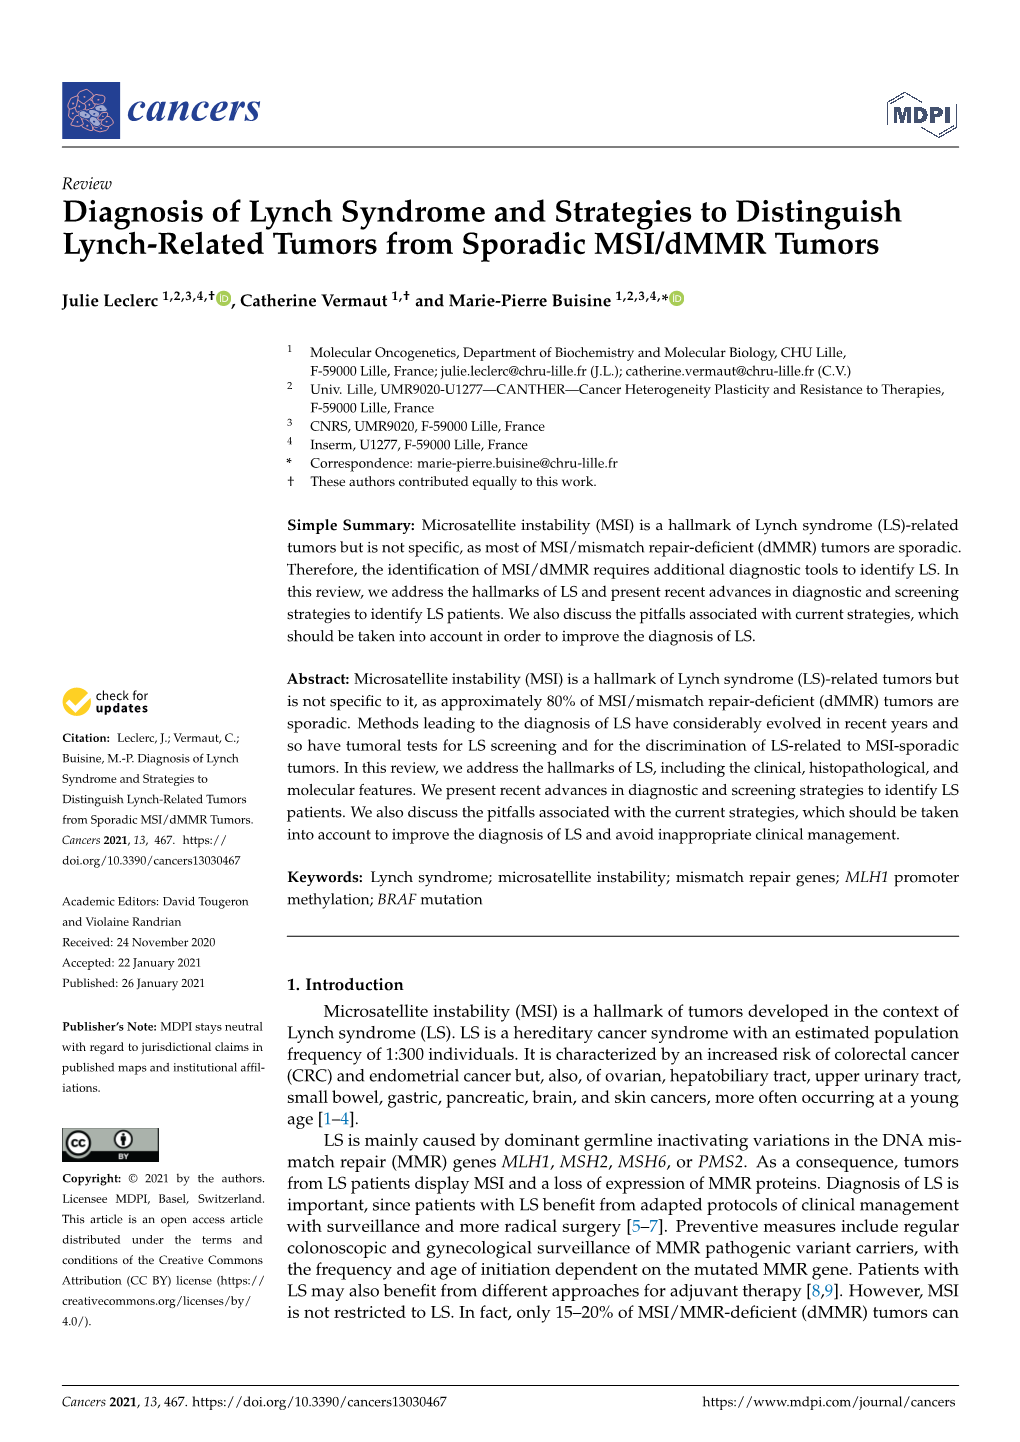 Diagnosis of Lynch Syndrome and Strategies to Distinguish Lynch-Related Tumors from Sporadic MSI/Dmmr Tumors